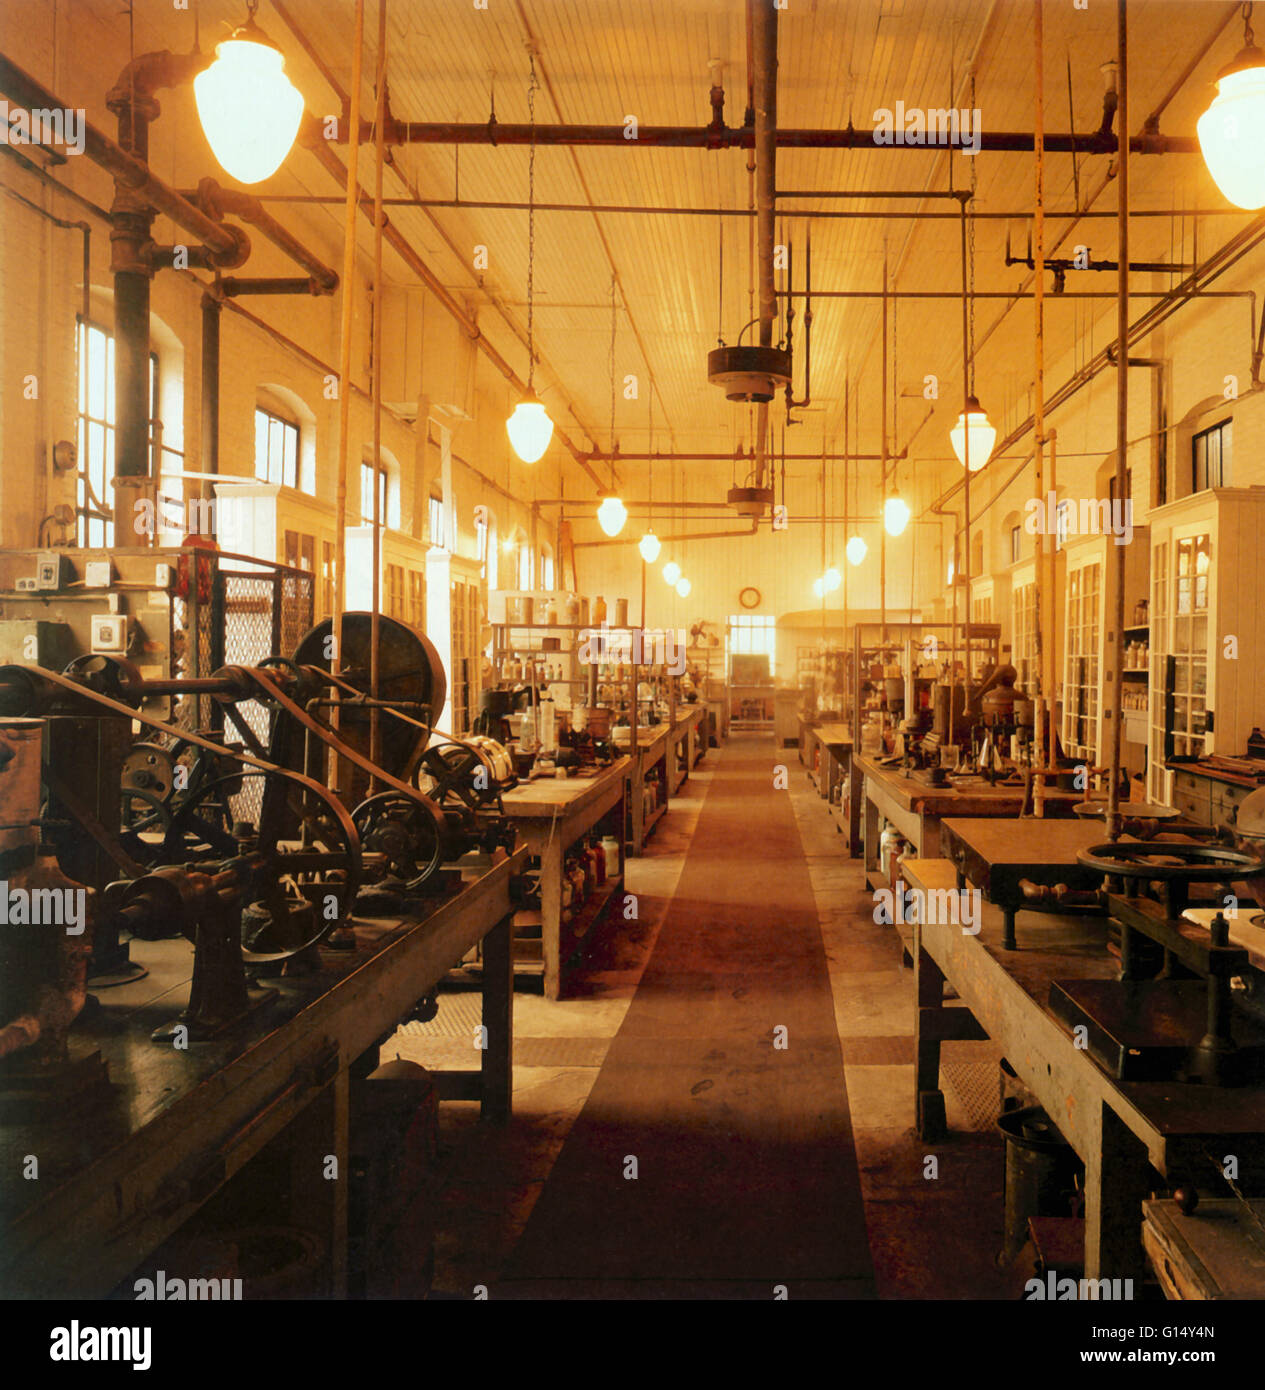 Thomas Edison's laboratory in East Orange, New Jersey, USA. Thomas Alva Edison (1847-1931) was an American inventor, famous for inventing or improving devices such as the phonograph and the electric light bulb. Edison was one of the first inventors to bui Stock Photo